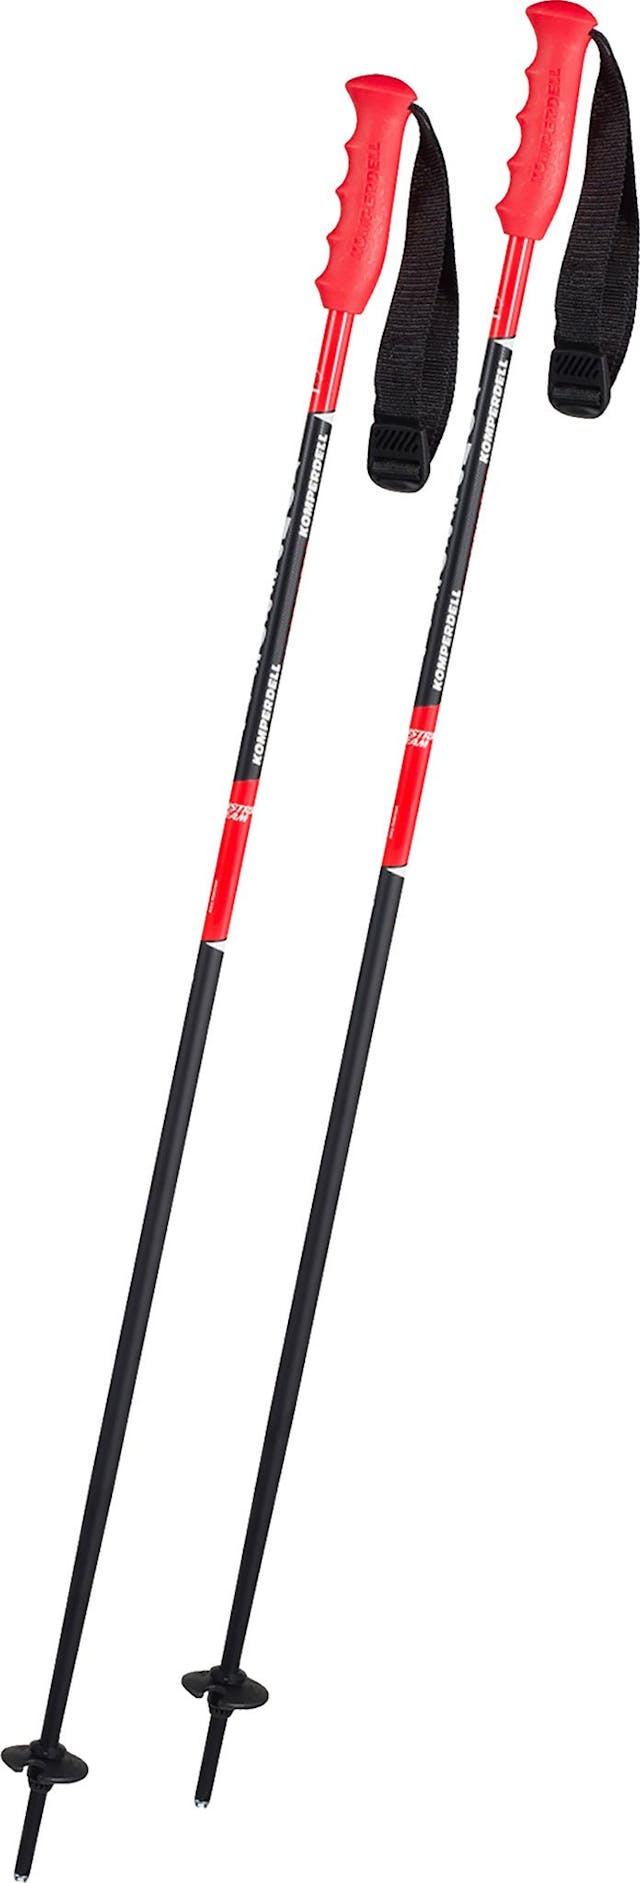 Product image for Champ Alice Ski Poles - Youth